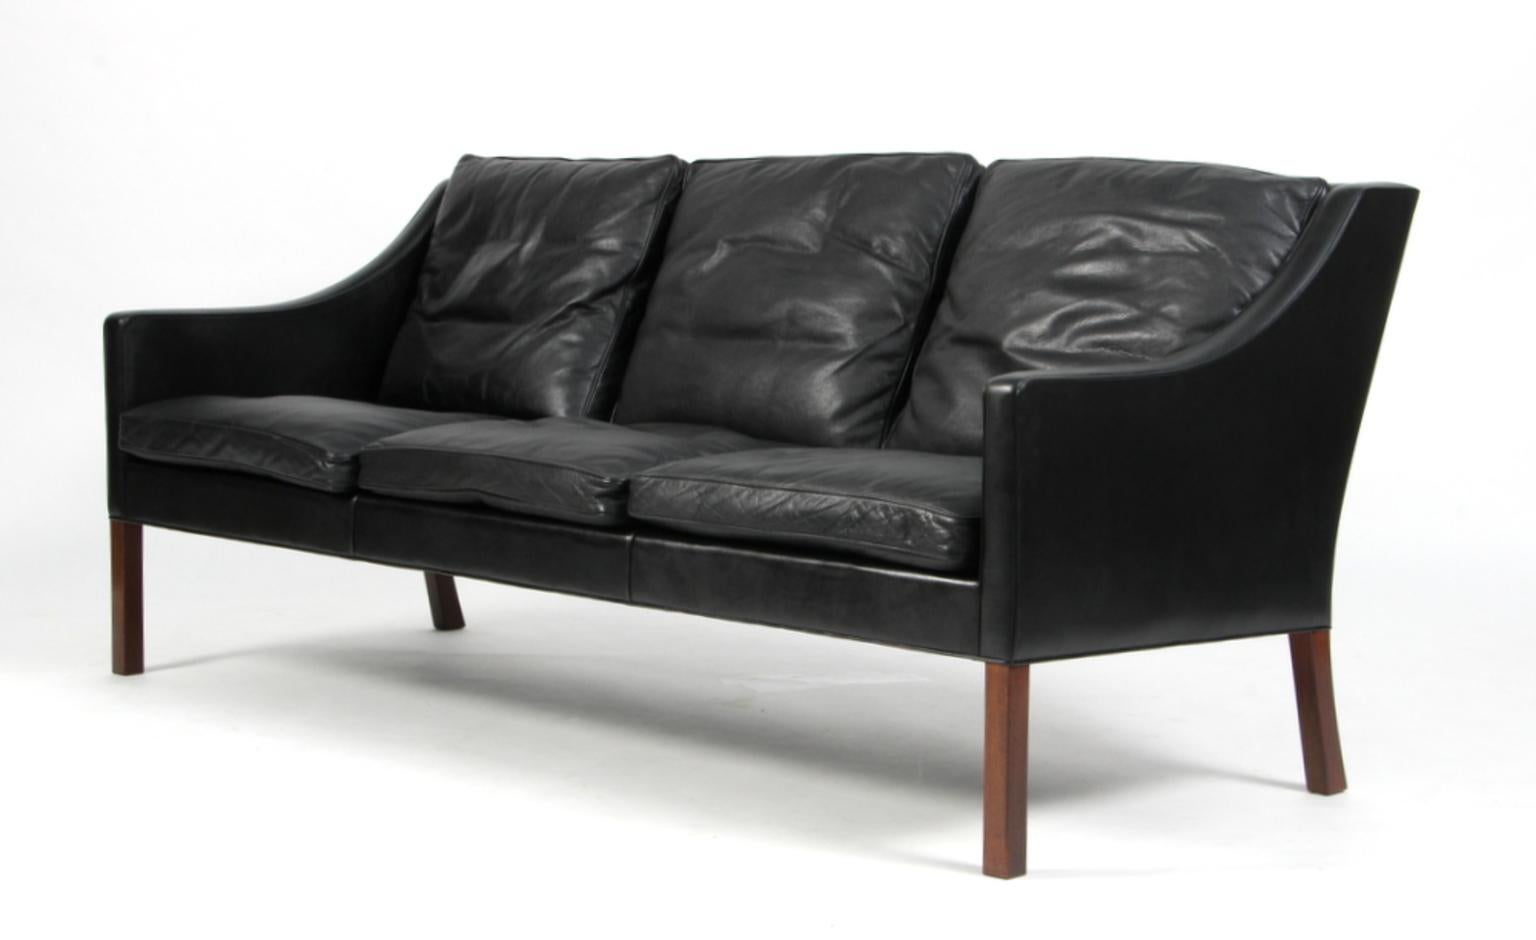 Børge Mogensen three-seat sofa original upholstered in lightly patinated black leather.

Legs of mahogany.

Model 2209, made by Fredericia Furniture.